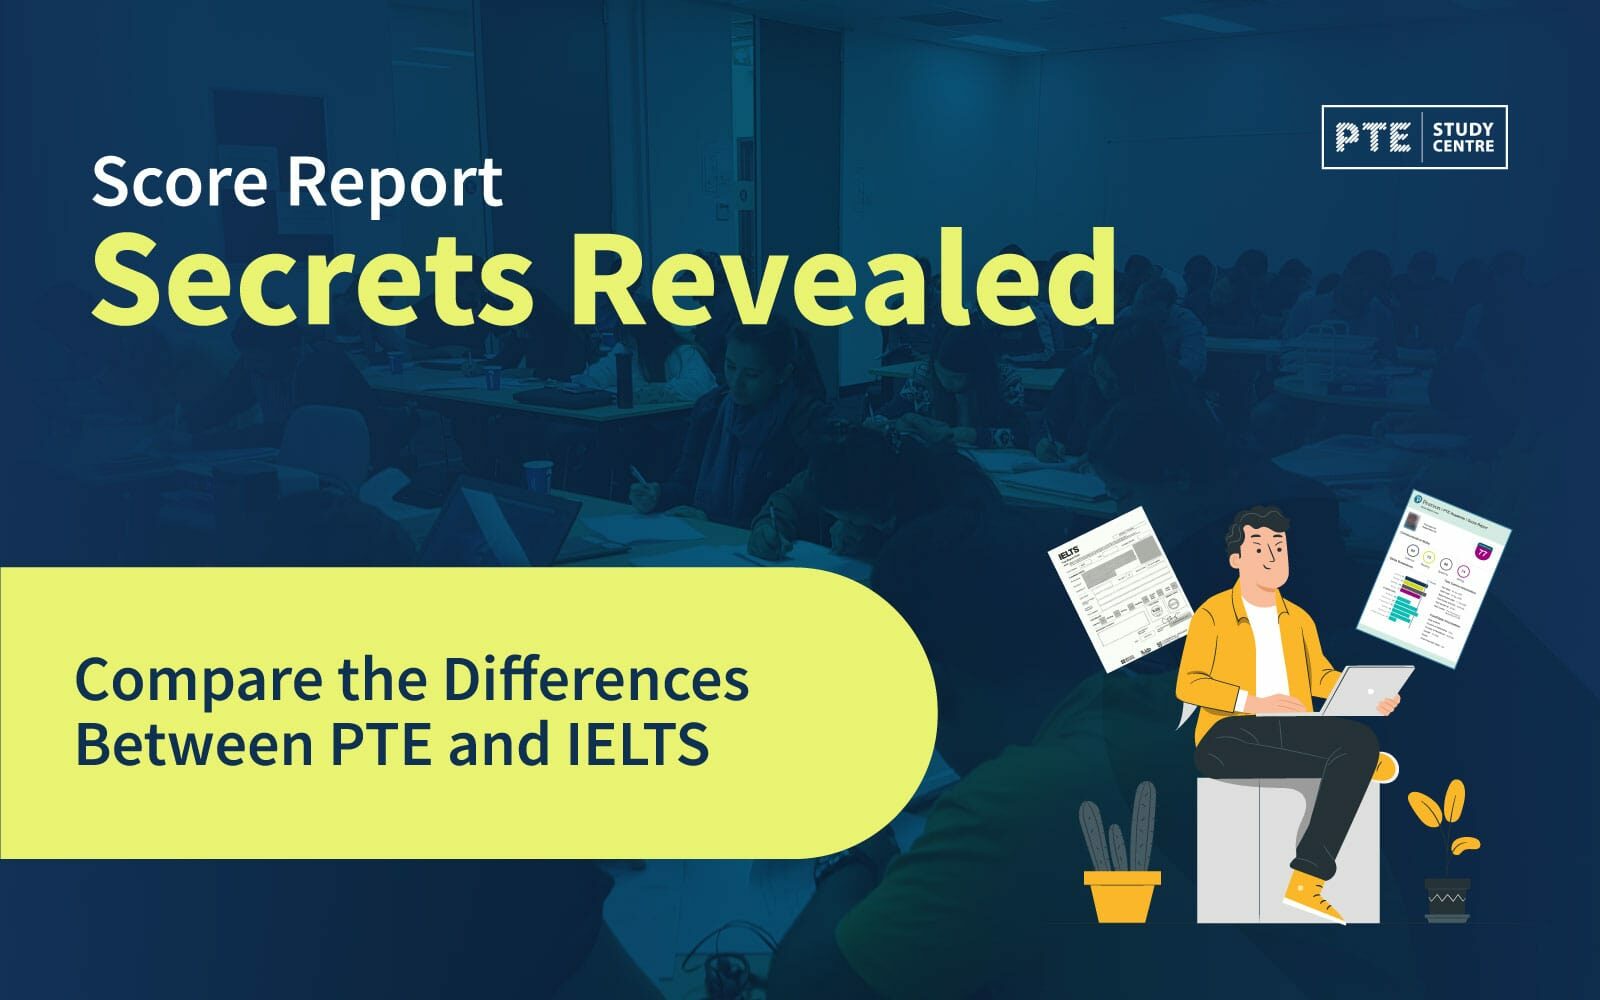 Score Report Secrets Revealed: Compare the Differences Between PTE and IELTS